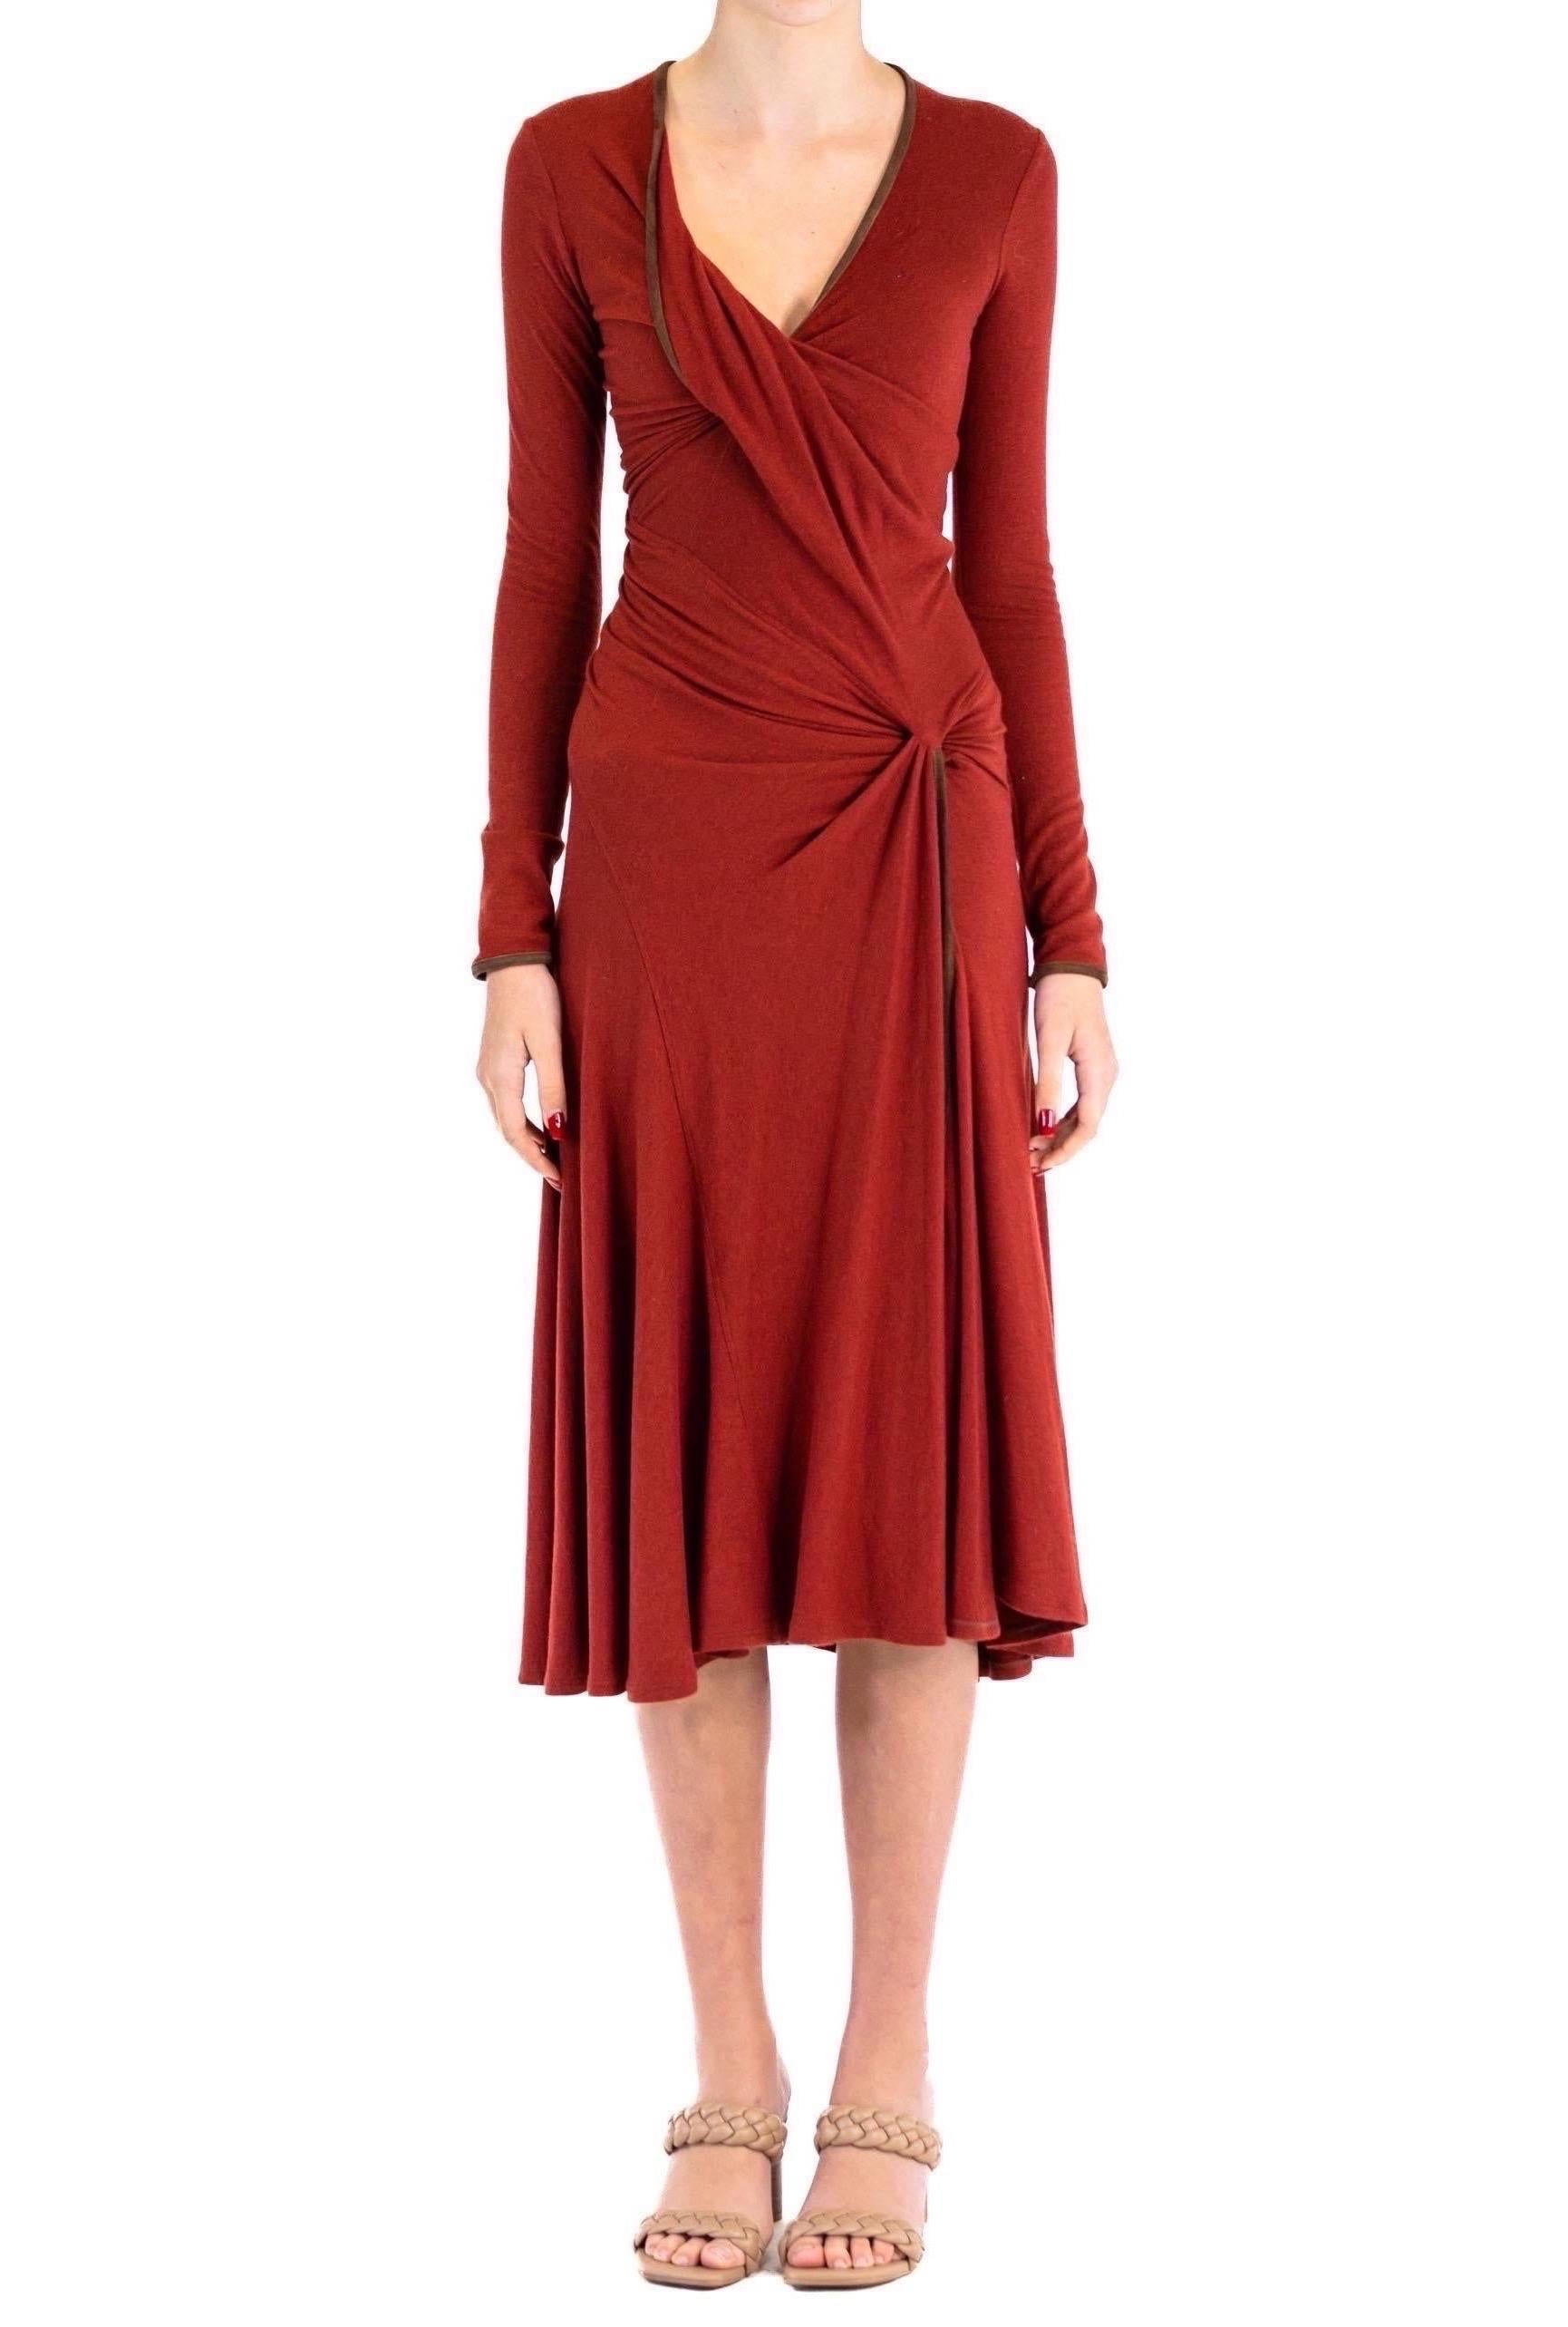 2000S DONNA KARAN Rust Red Wool Blend Jersey Dress With Lambskin Suede Trim In Excellent Condition For Sale In New York, NY